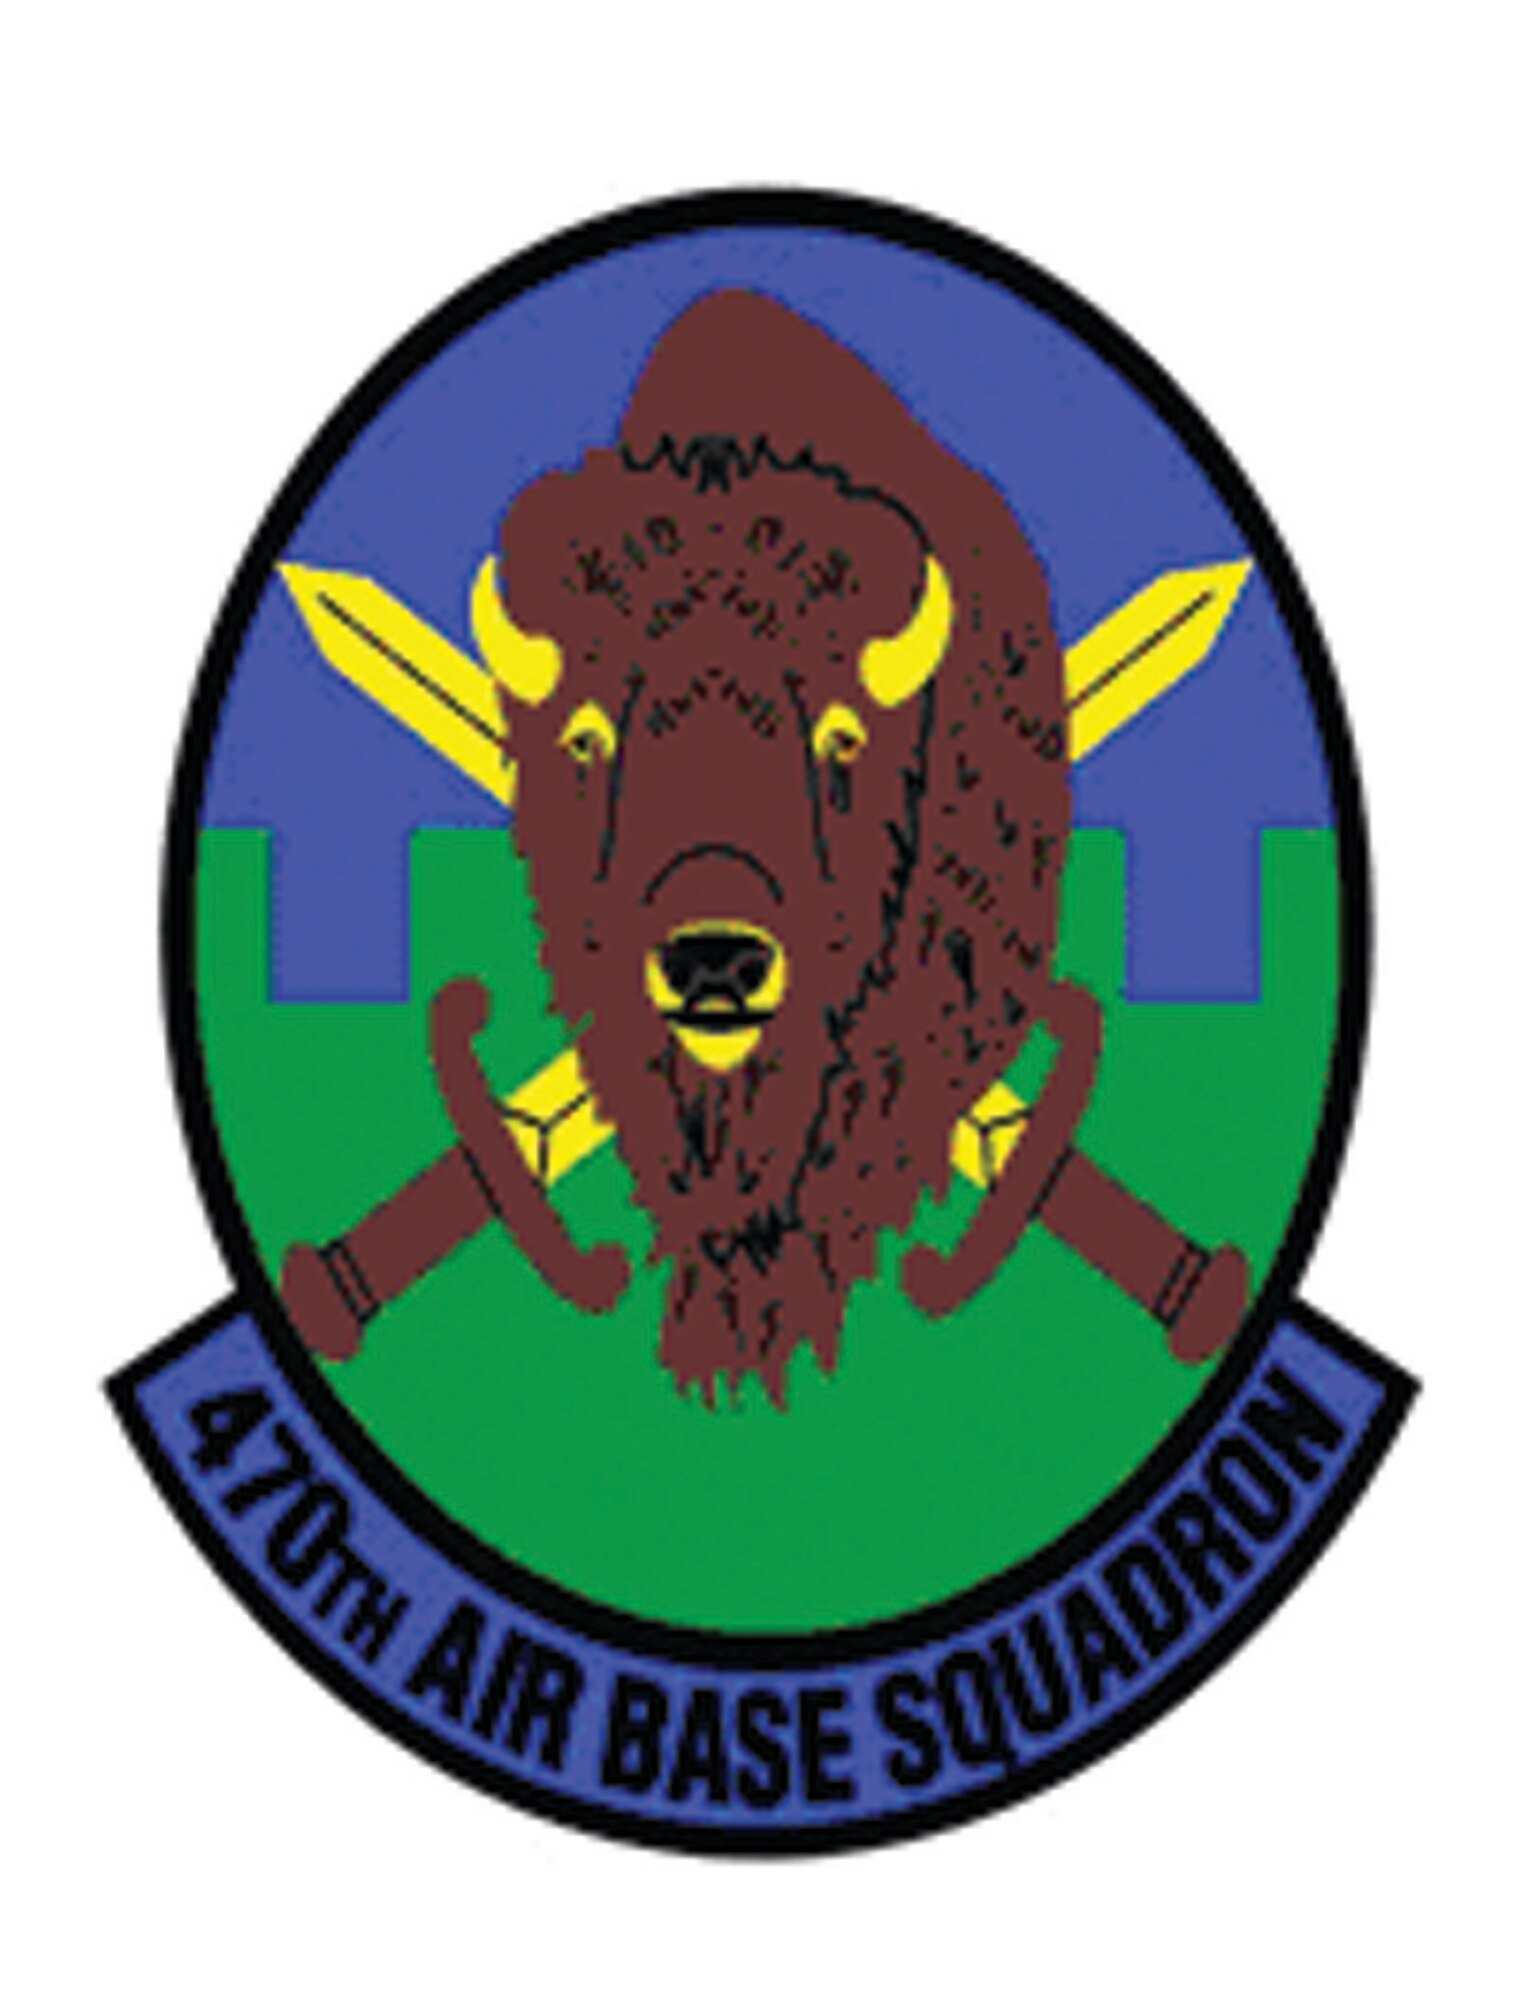 470th Air Base Squadron patch